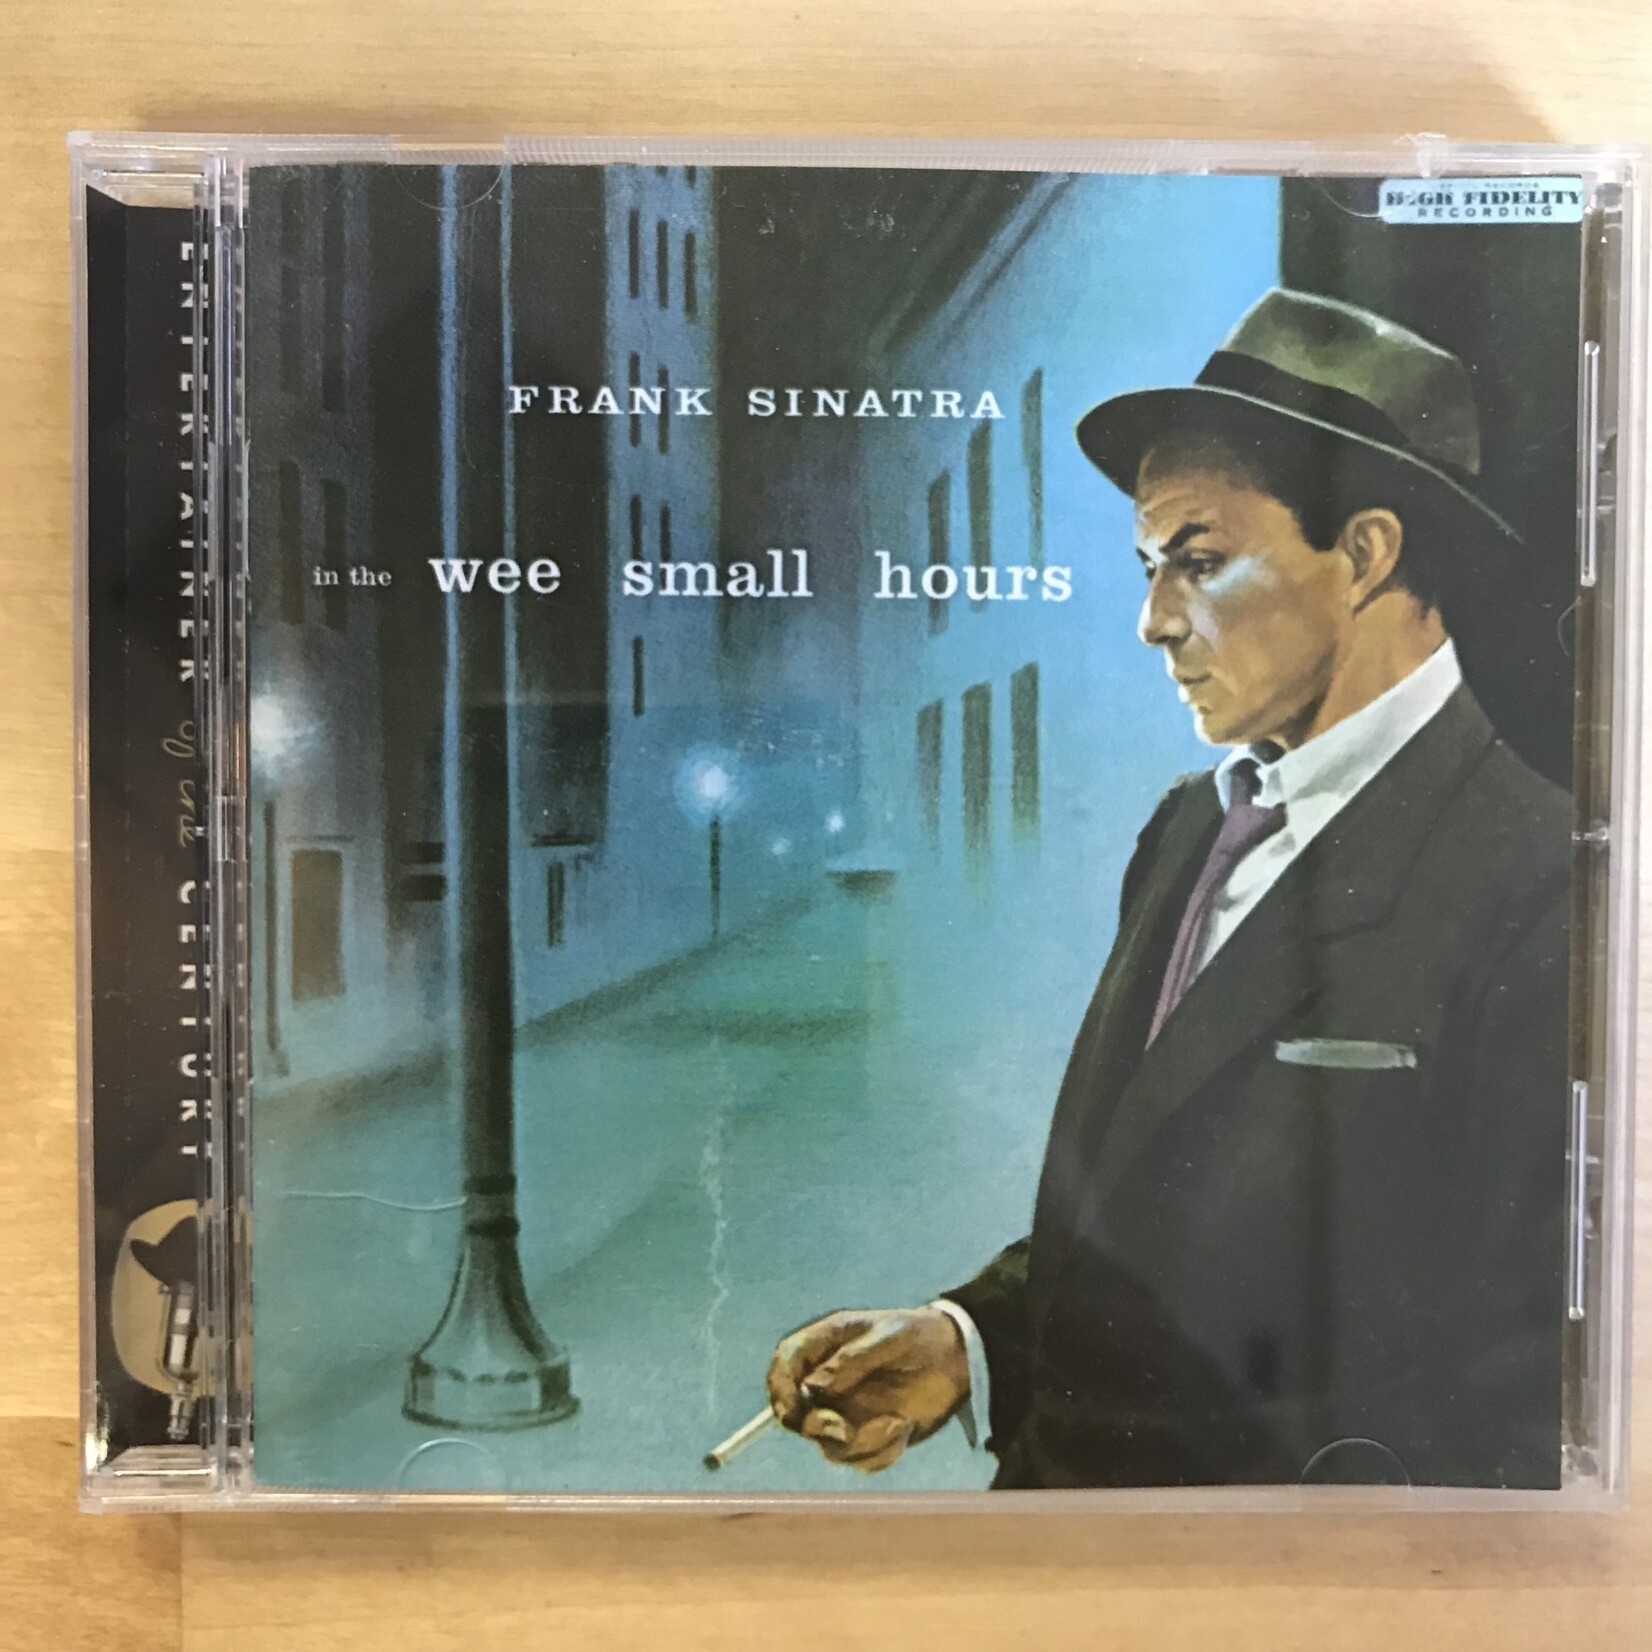 Frank Sinatra - The Wee Small Hours - CD (USED)